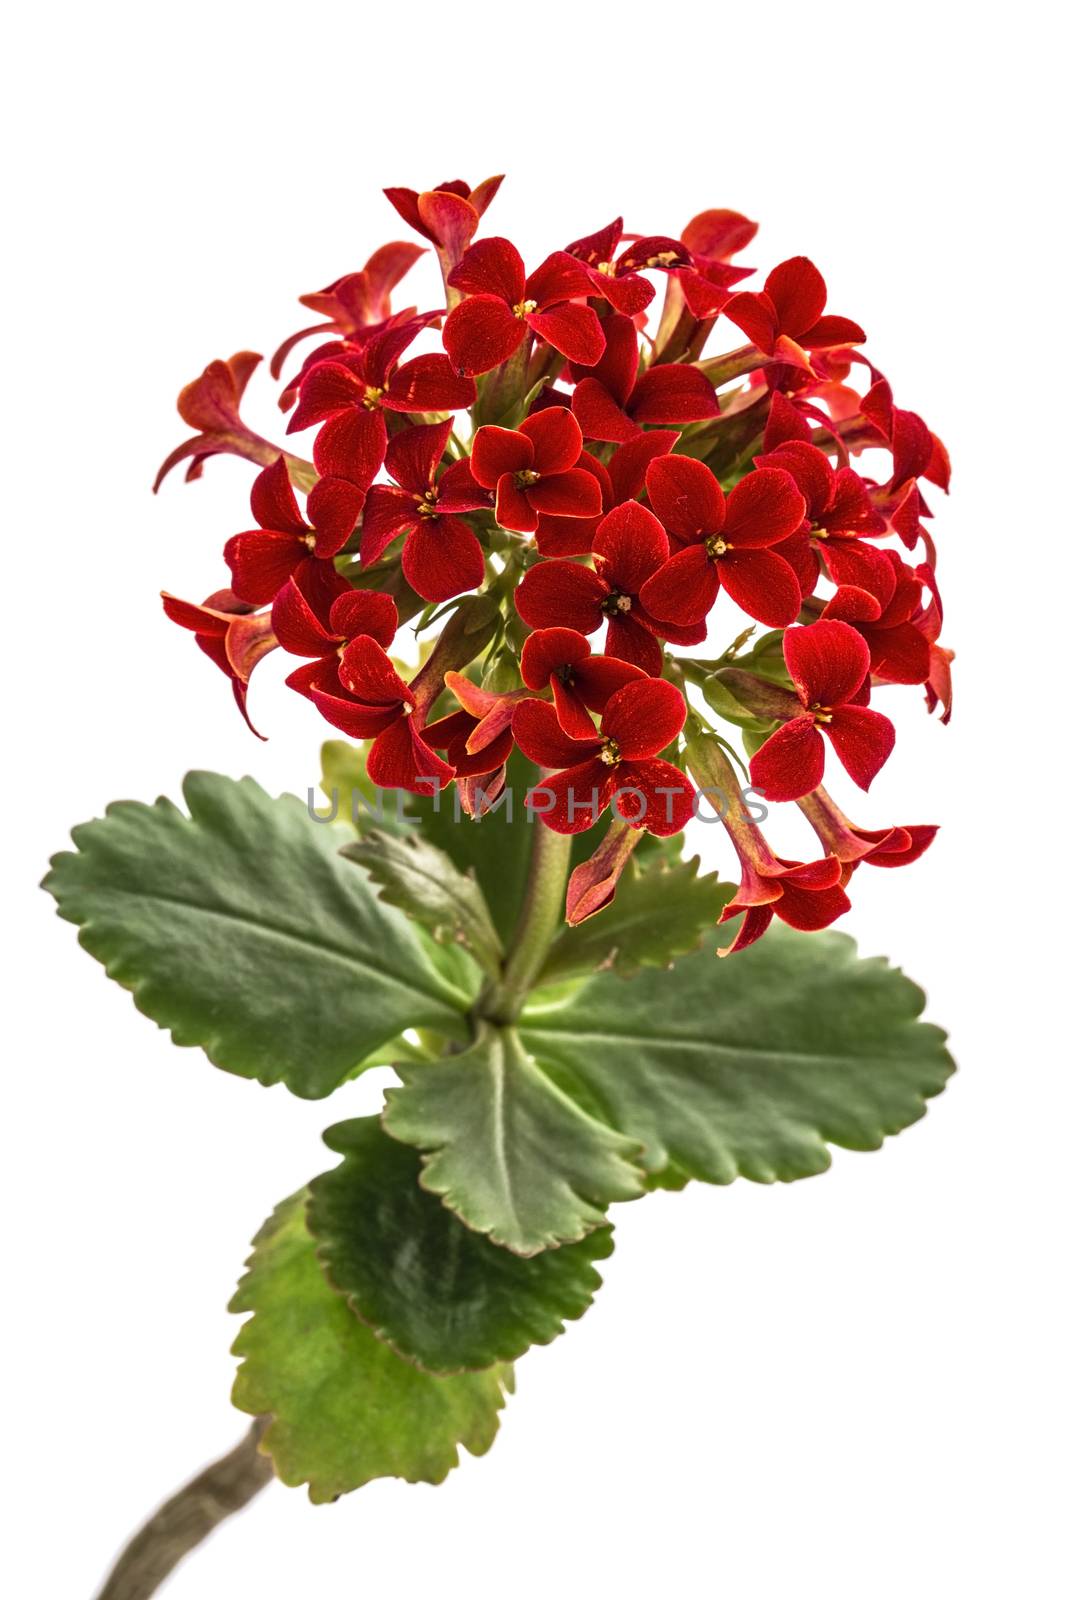 Flower Kalanchoe, tropical succulent, isolated on white backgrou by kostiuchenko